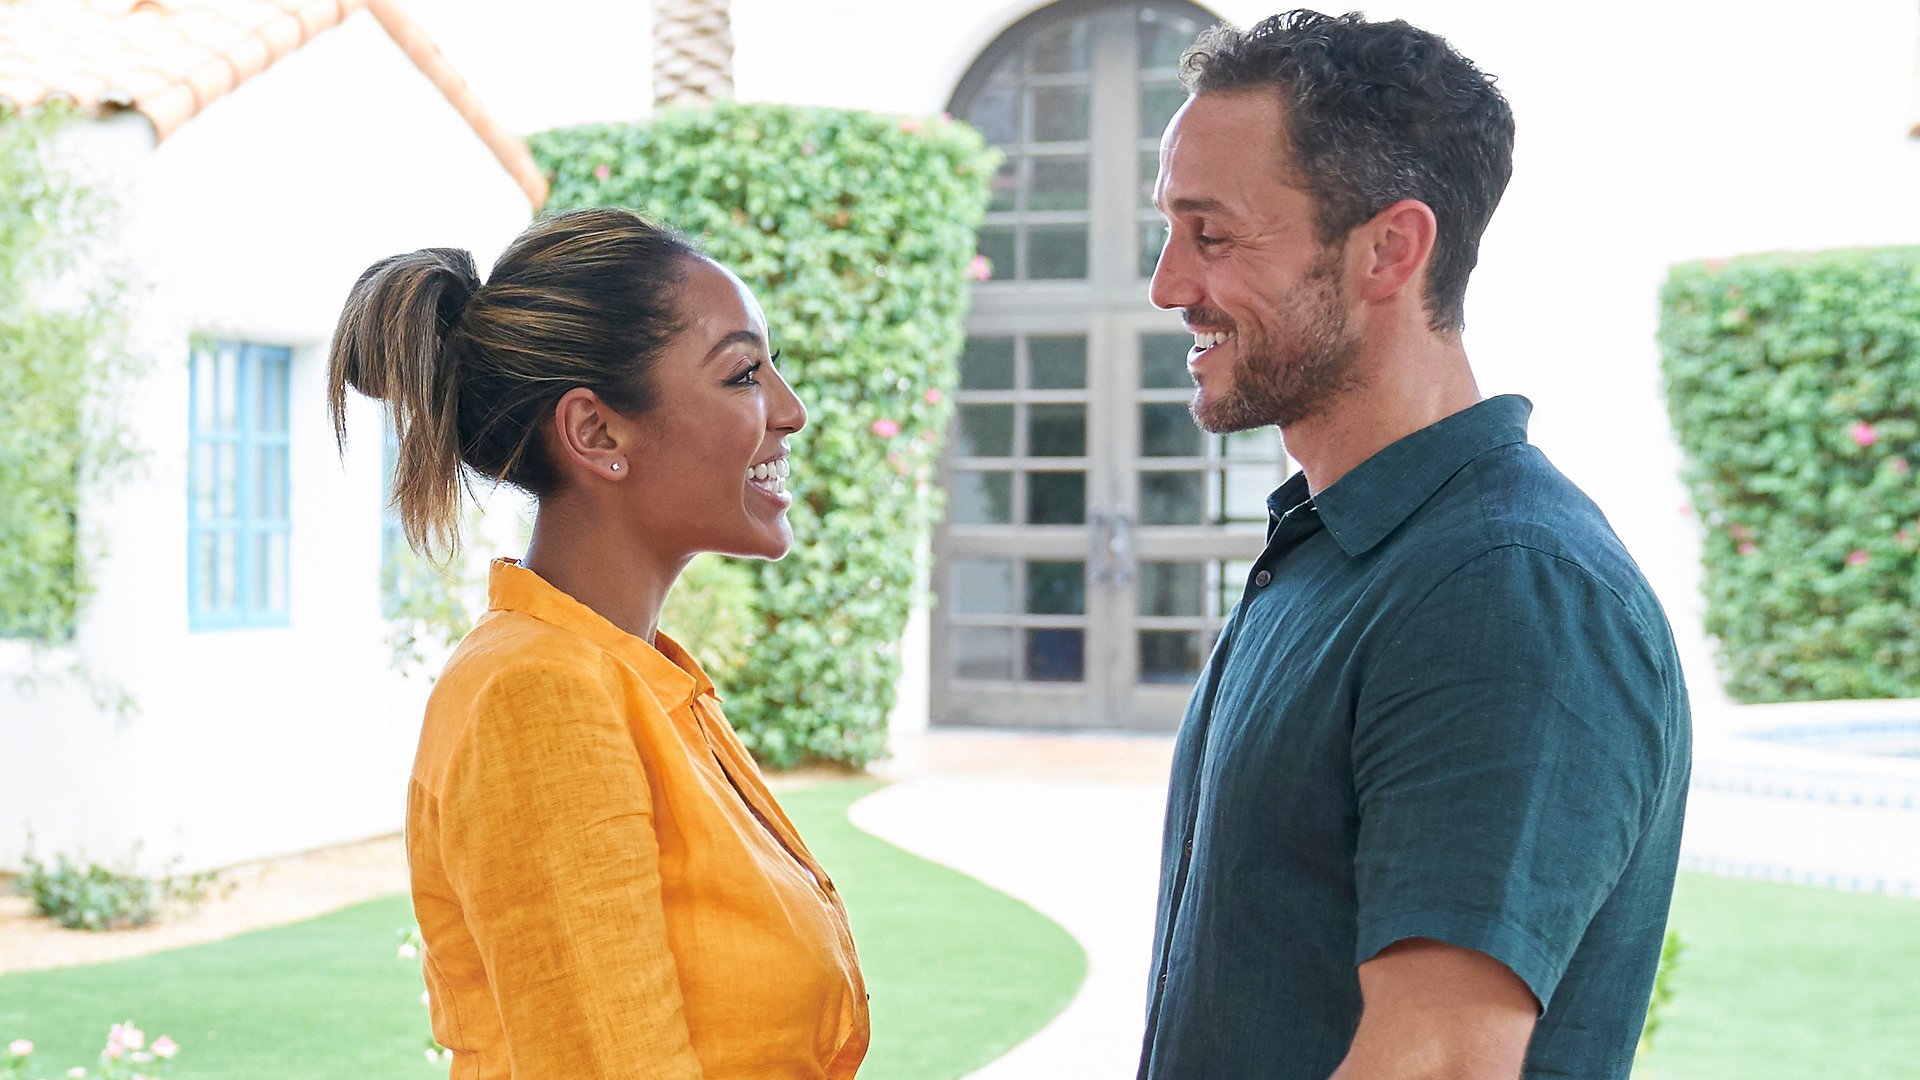 Tayshia Adams and Zac Clark spending time together on a date on 'The Bachelorette' Season 16 finale in 2020